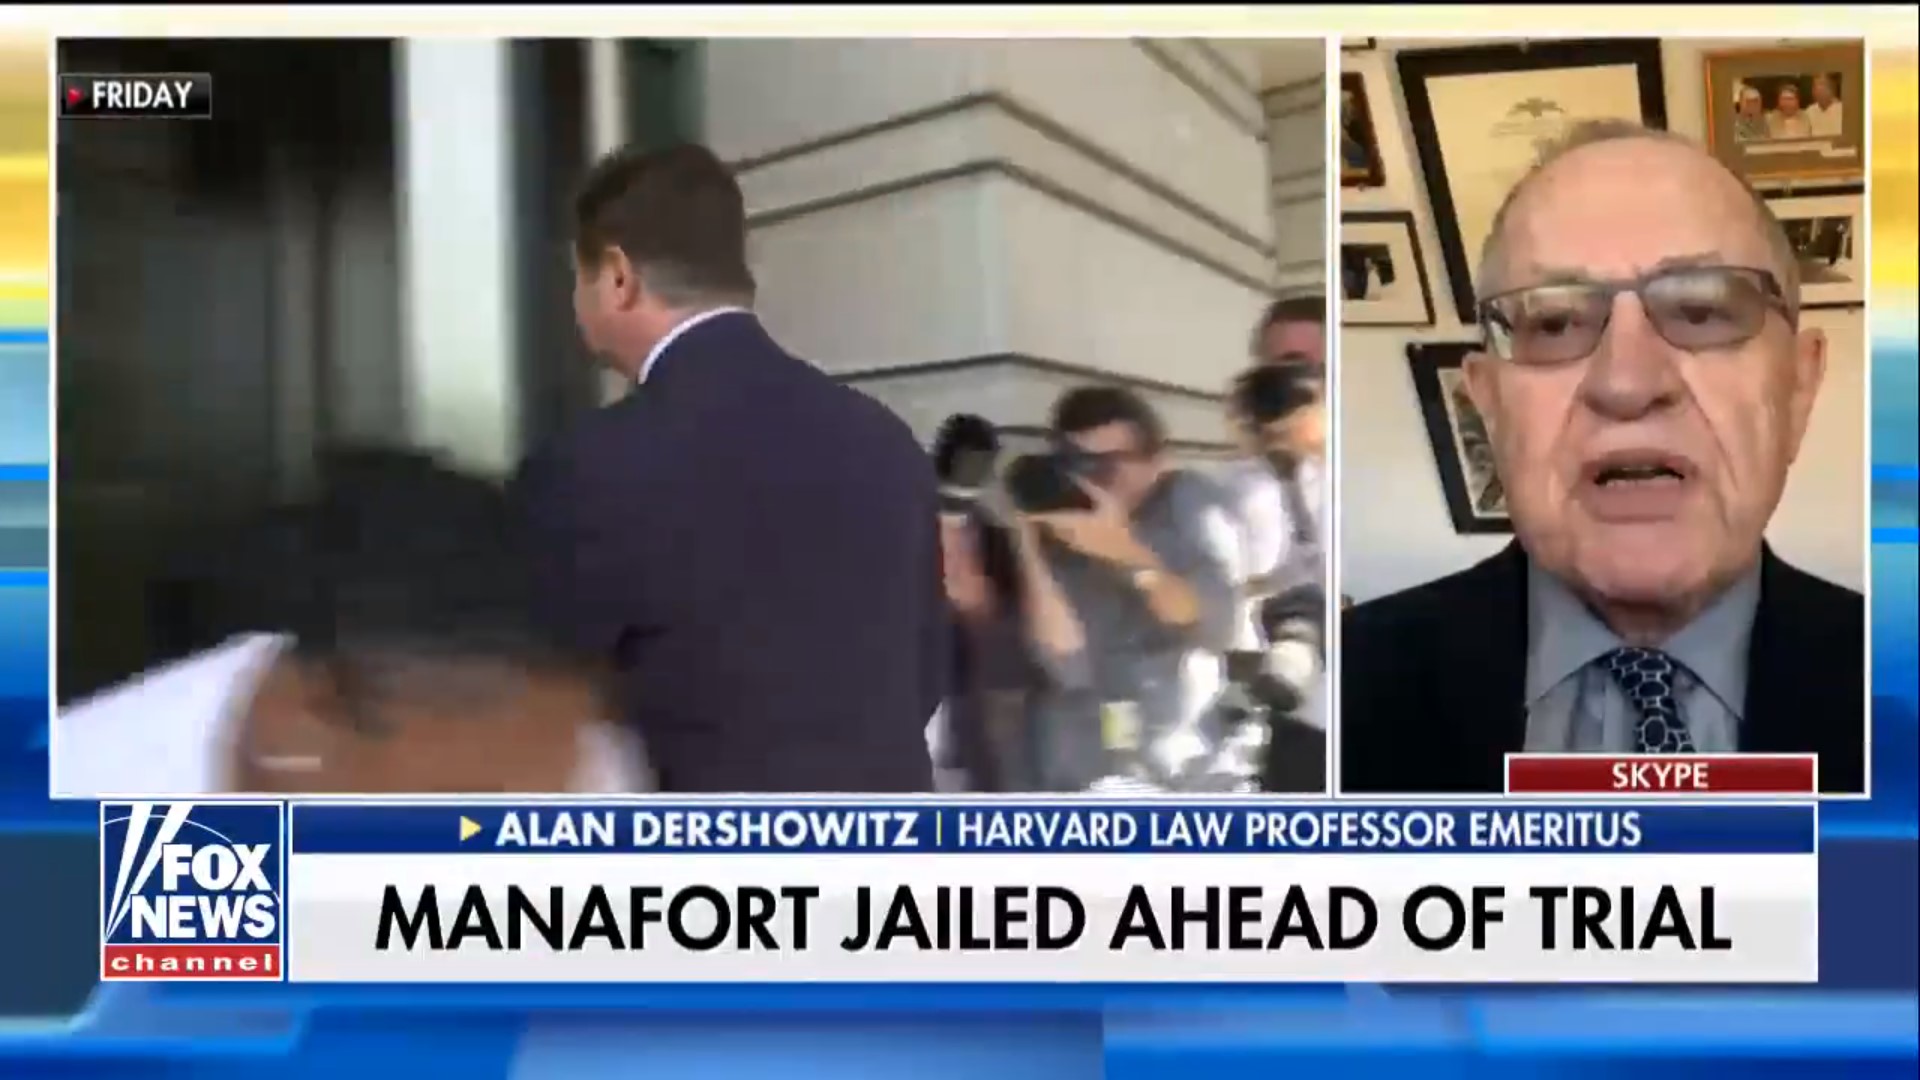 Alan Dershowitz Takes Heat Over Complaints That Paul Manafort Was Wrongly Jailed